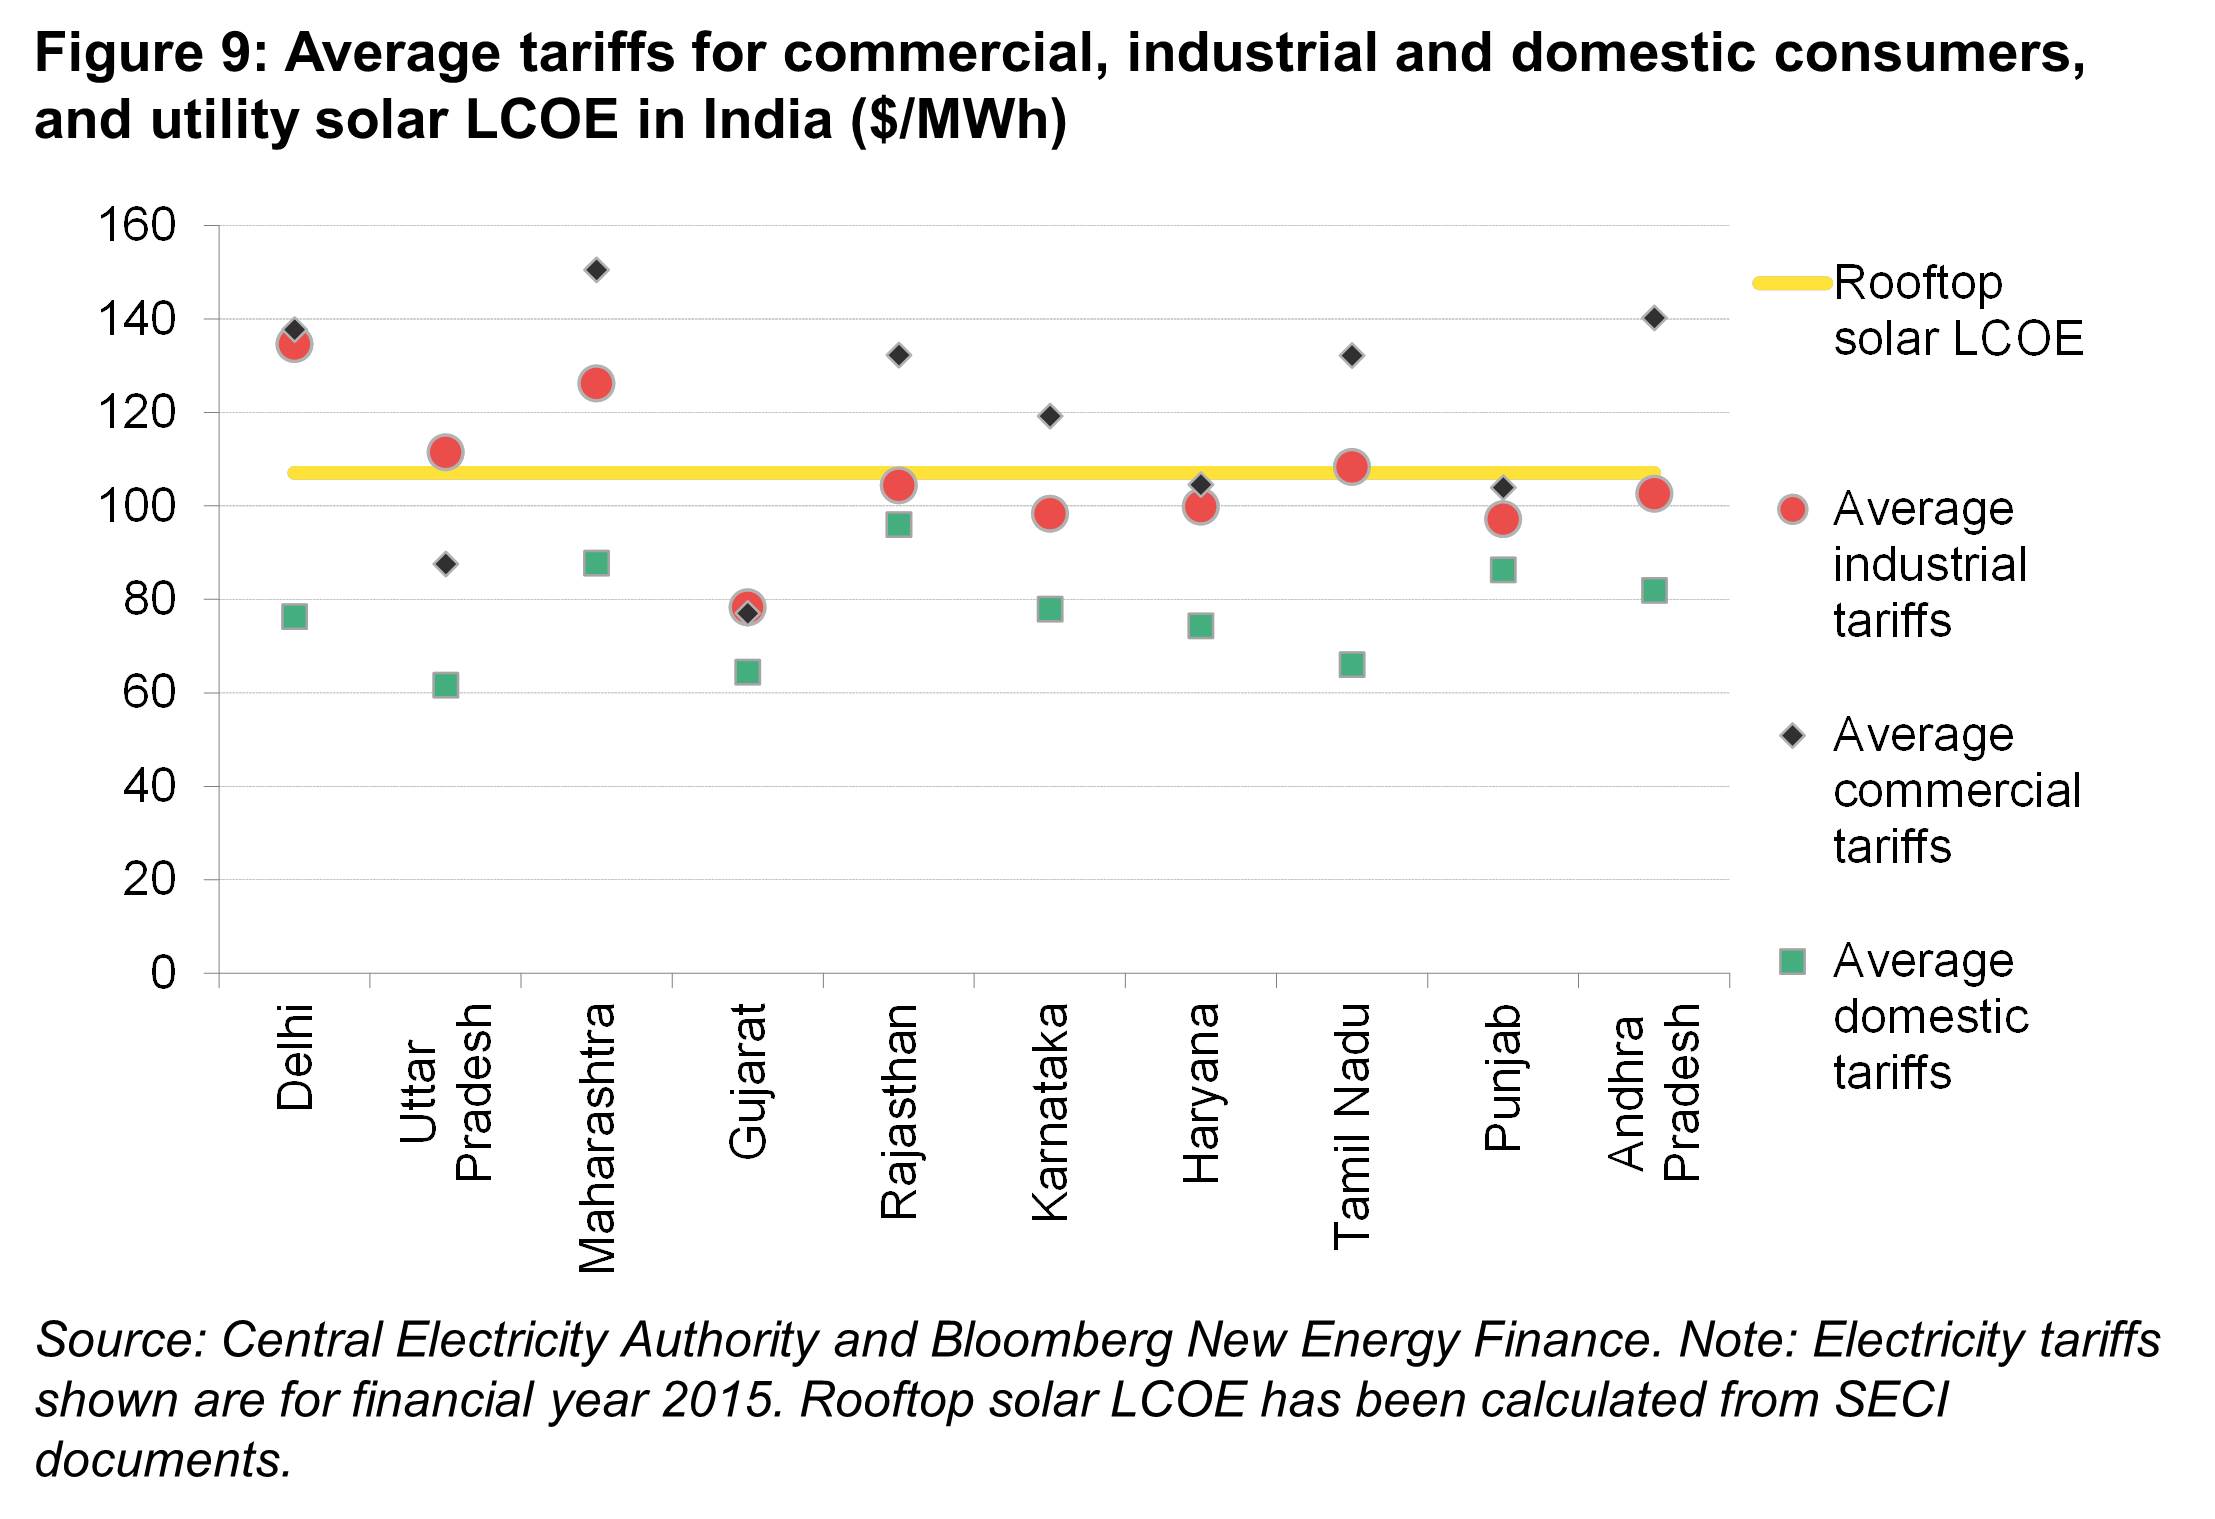 OG - Fig9 - Average tariffs for commercial, industrial and domestic consumers, and utility solar LCOE in India